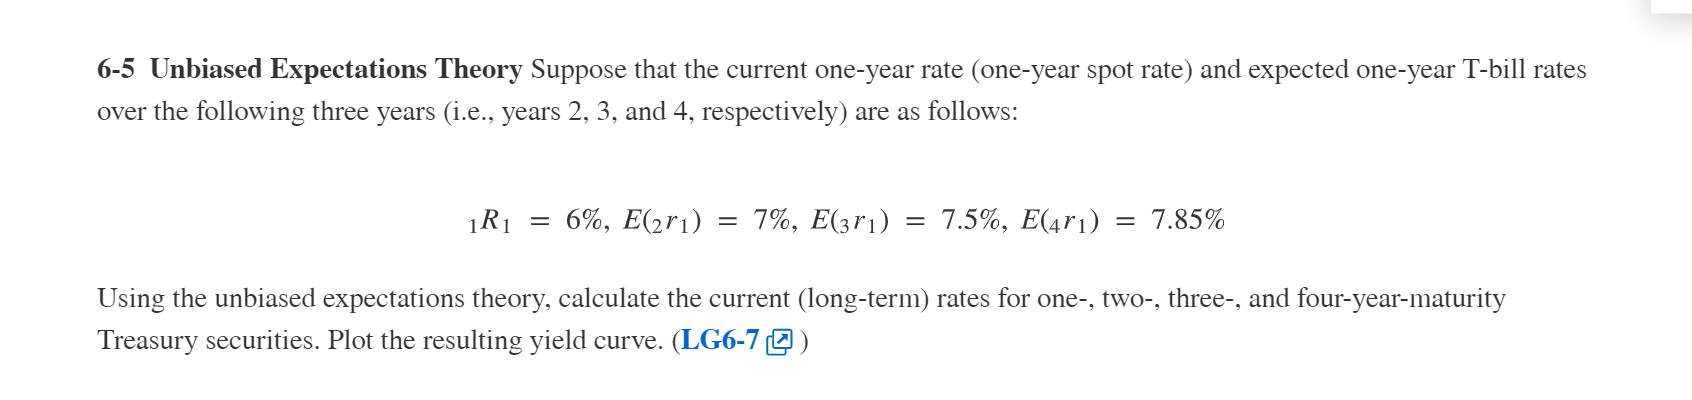 6-5 Unbiased Expectations Theory Suppose that the current one-year rate (one-year spot rate) and expected one-year T-bill rates
over the following three years (i.e., years 2, 3, and 4, respectively) are as follows:
6%, E(2r1)
7%, E(3r1) = 7.5%, E(4r1)
7.85%
Using the unbiased expectations theory, calculate the current (long-term) rates for one-, two-, three-, and four-year-maturity
Treasury securities. Plot the resulting yield curve. (LG6-7 2 )
